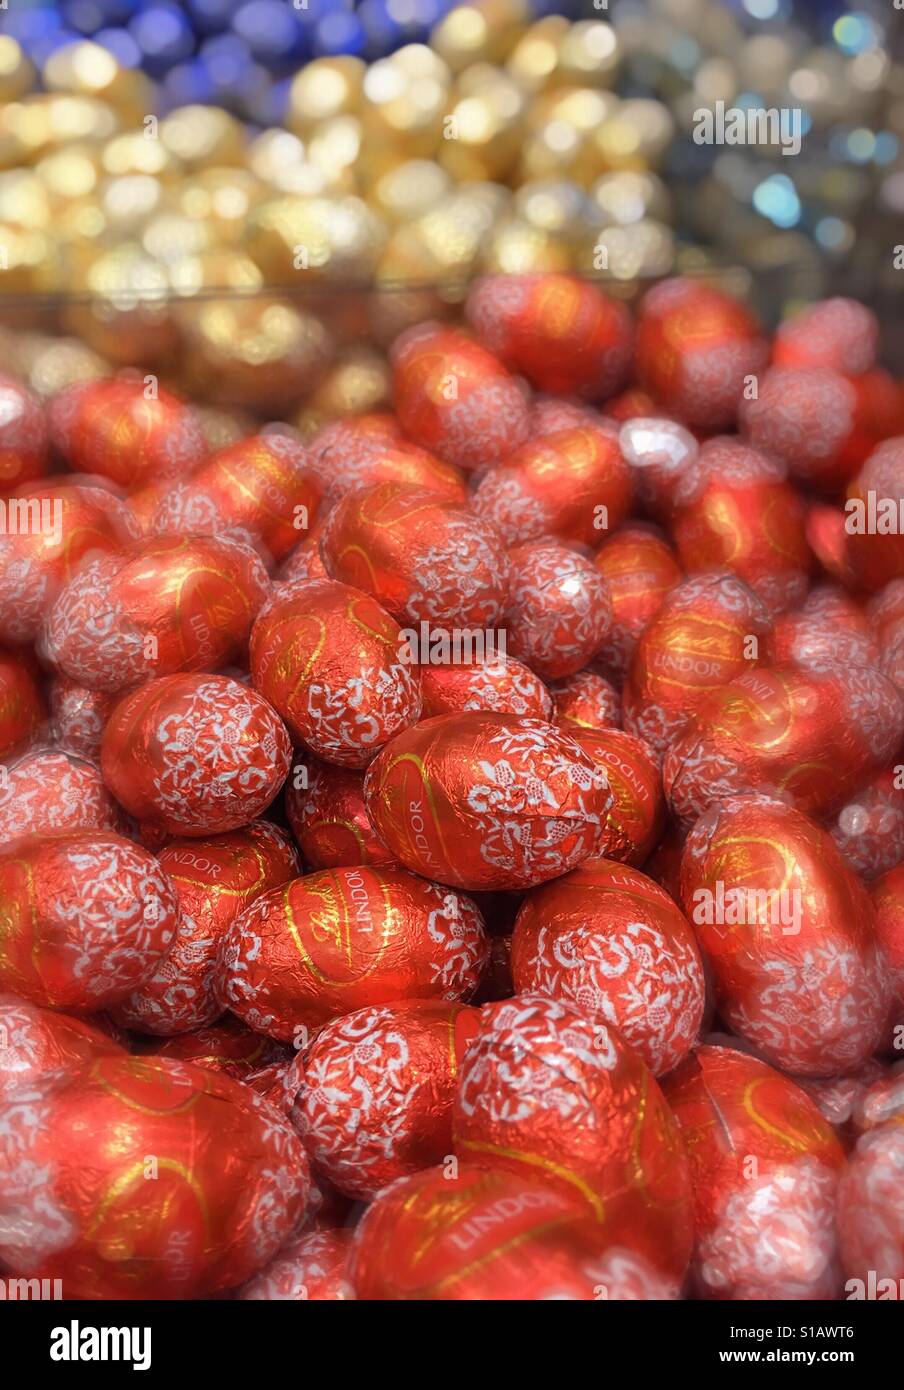 Chocolate foil wrapped Easter egg candies, USA Stock Photo